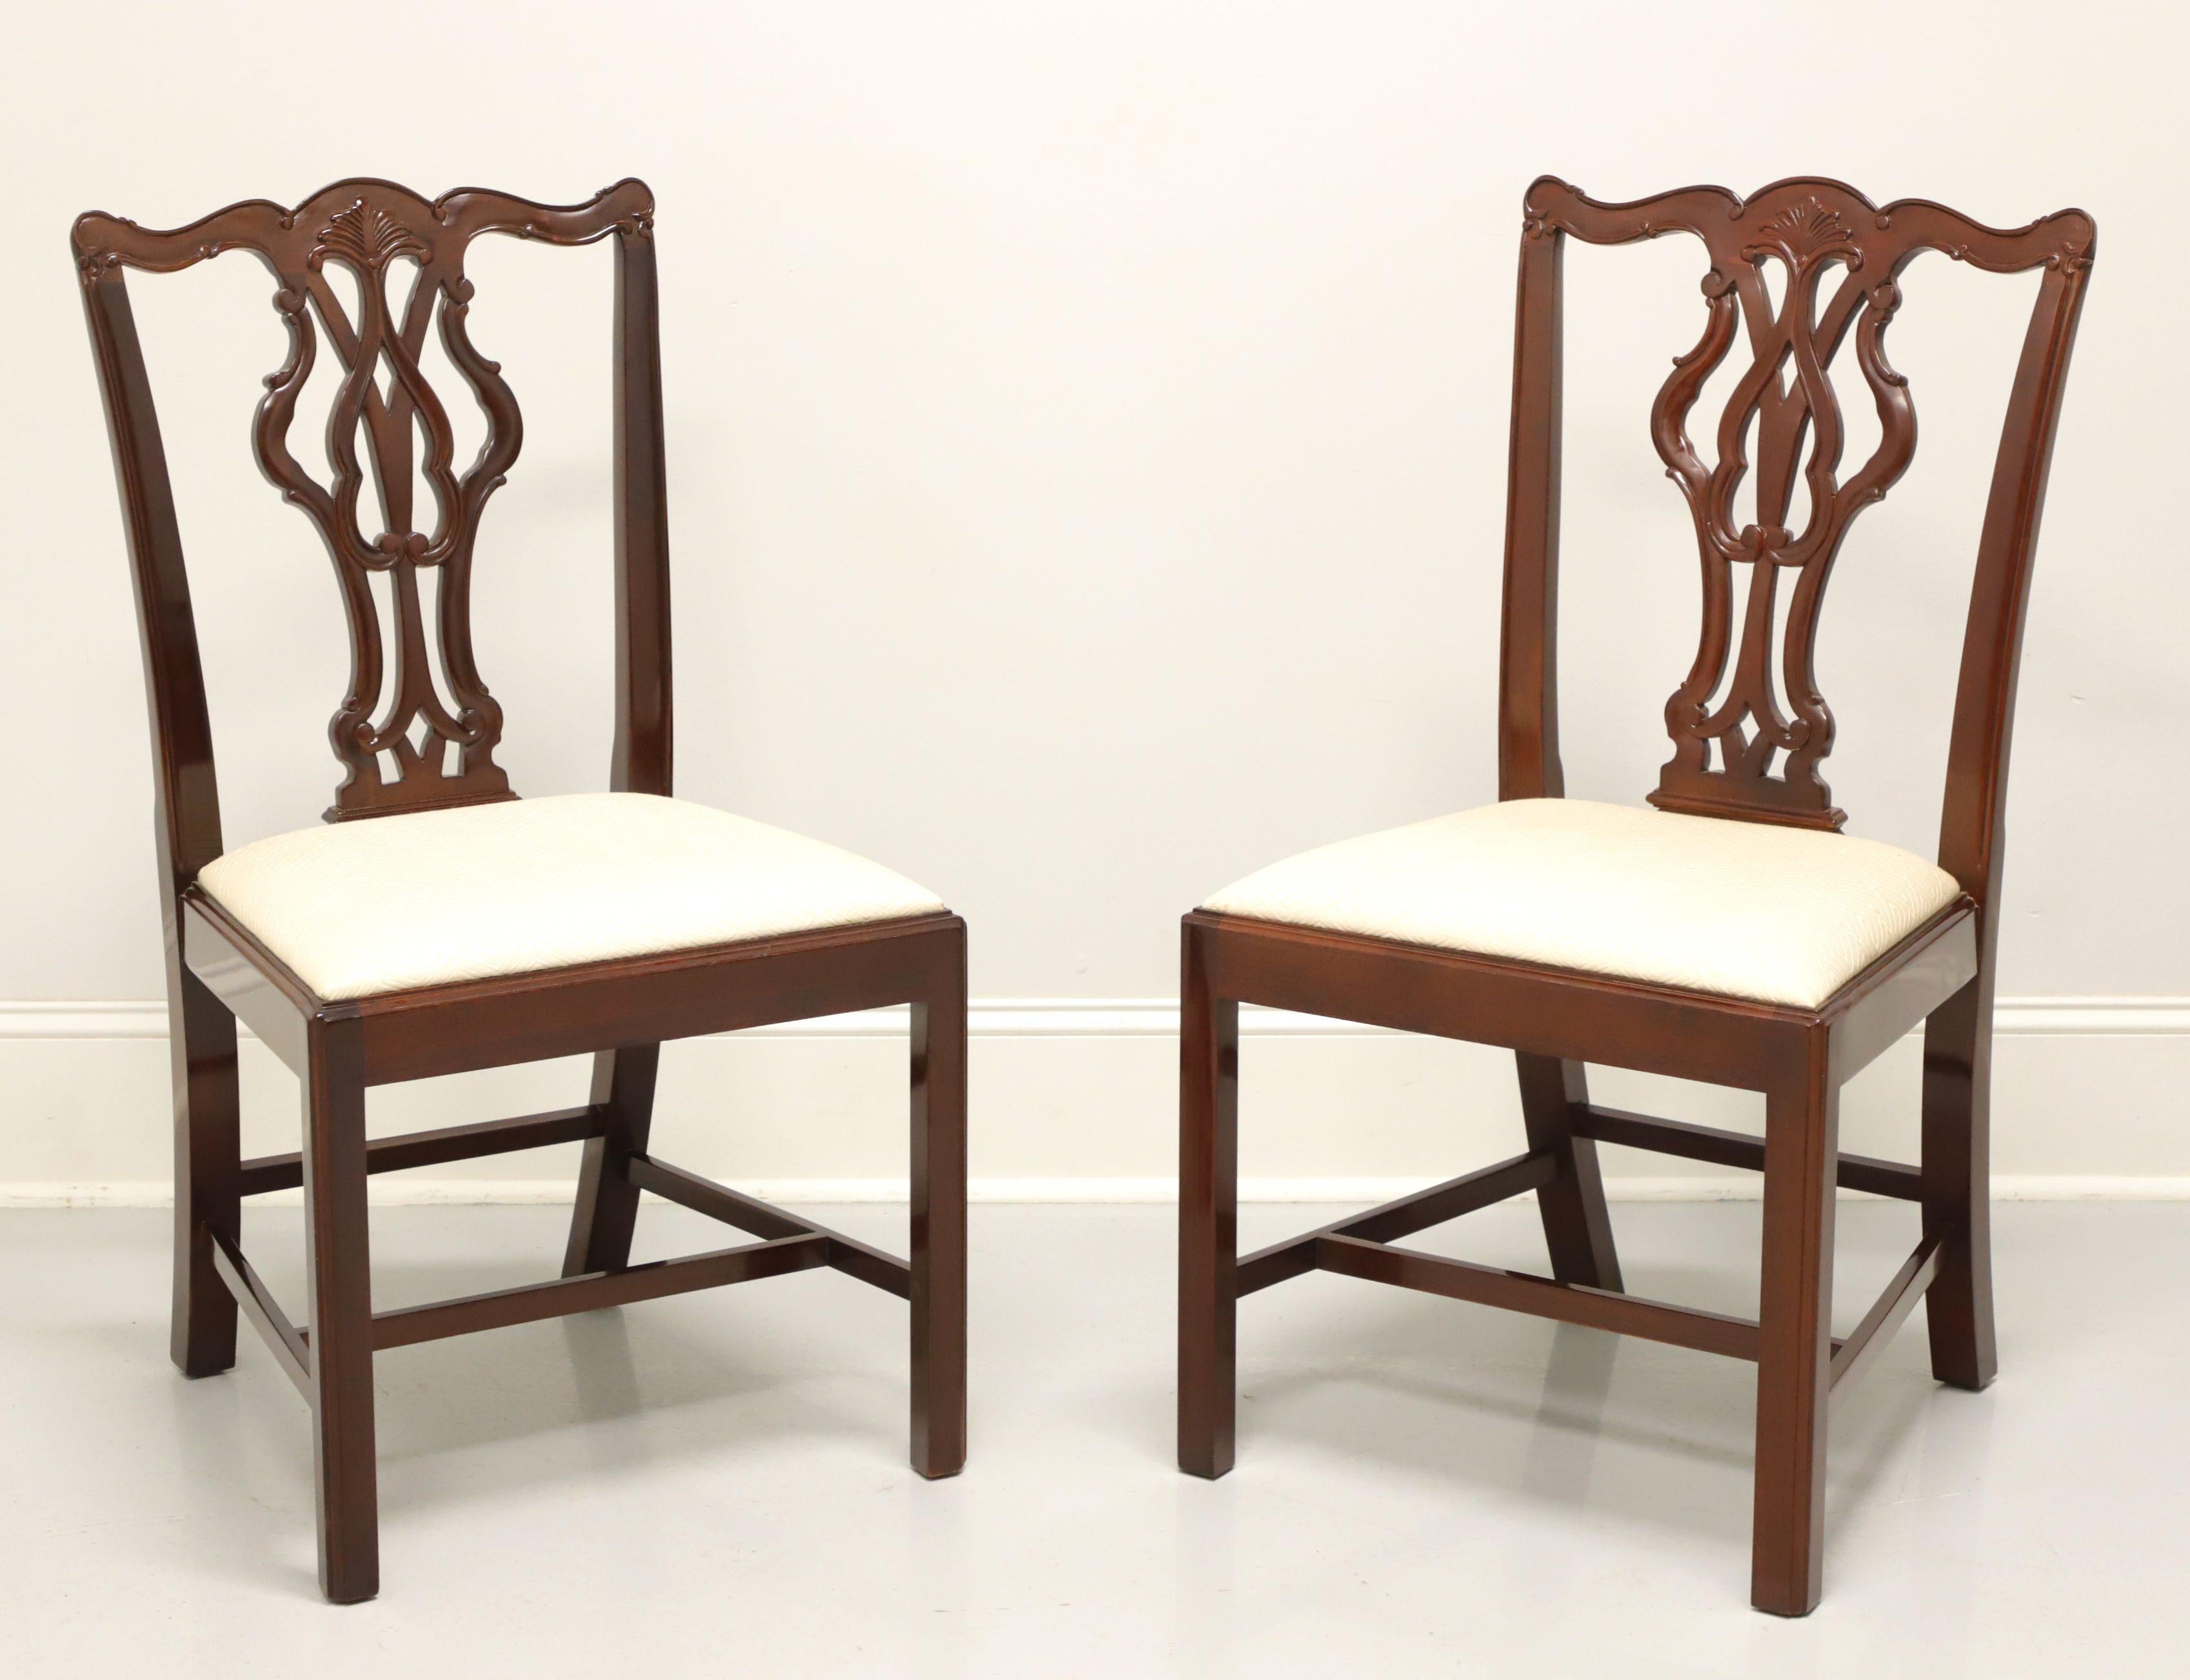 WELLINGTON HALL Mahogany Chippendale Straight Leg Dining Side Chairs - Pair B For Sale 4